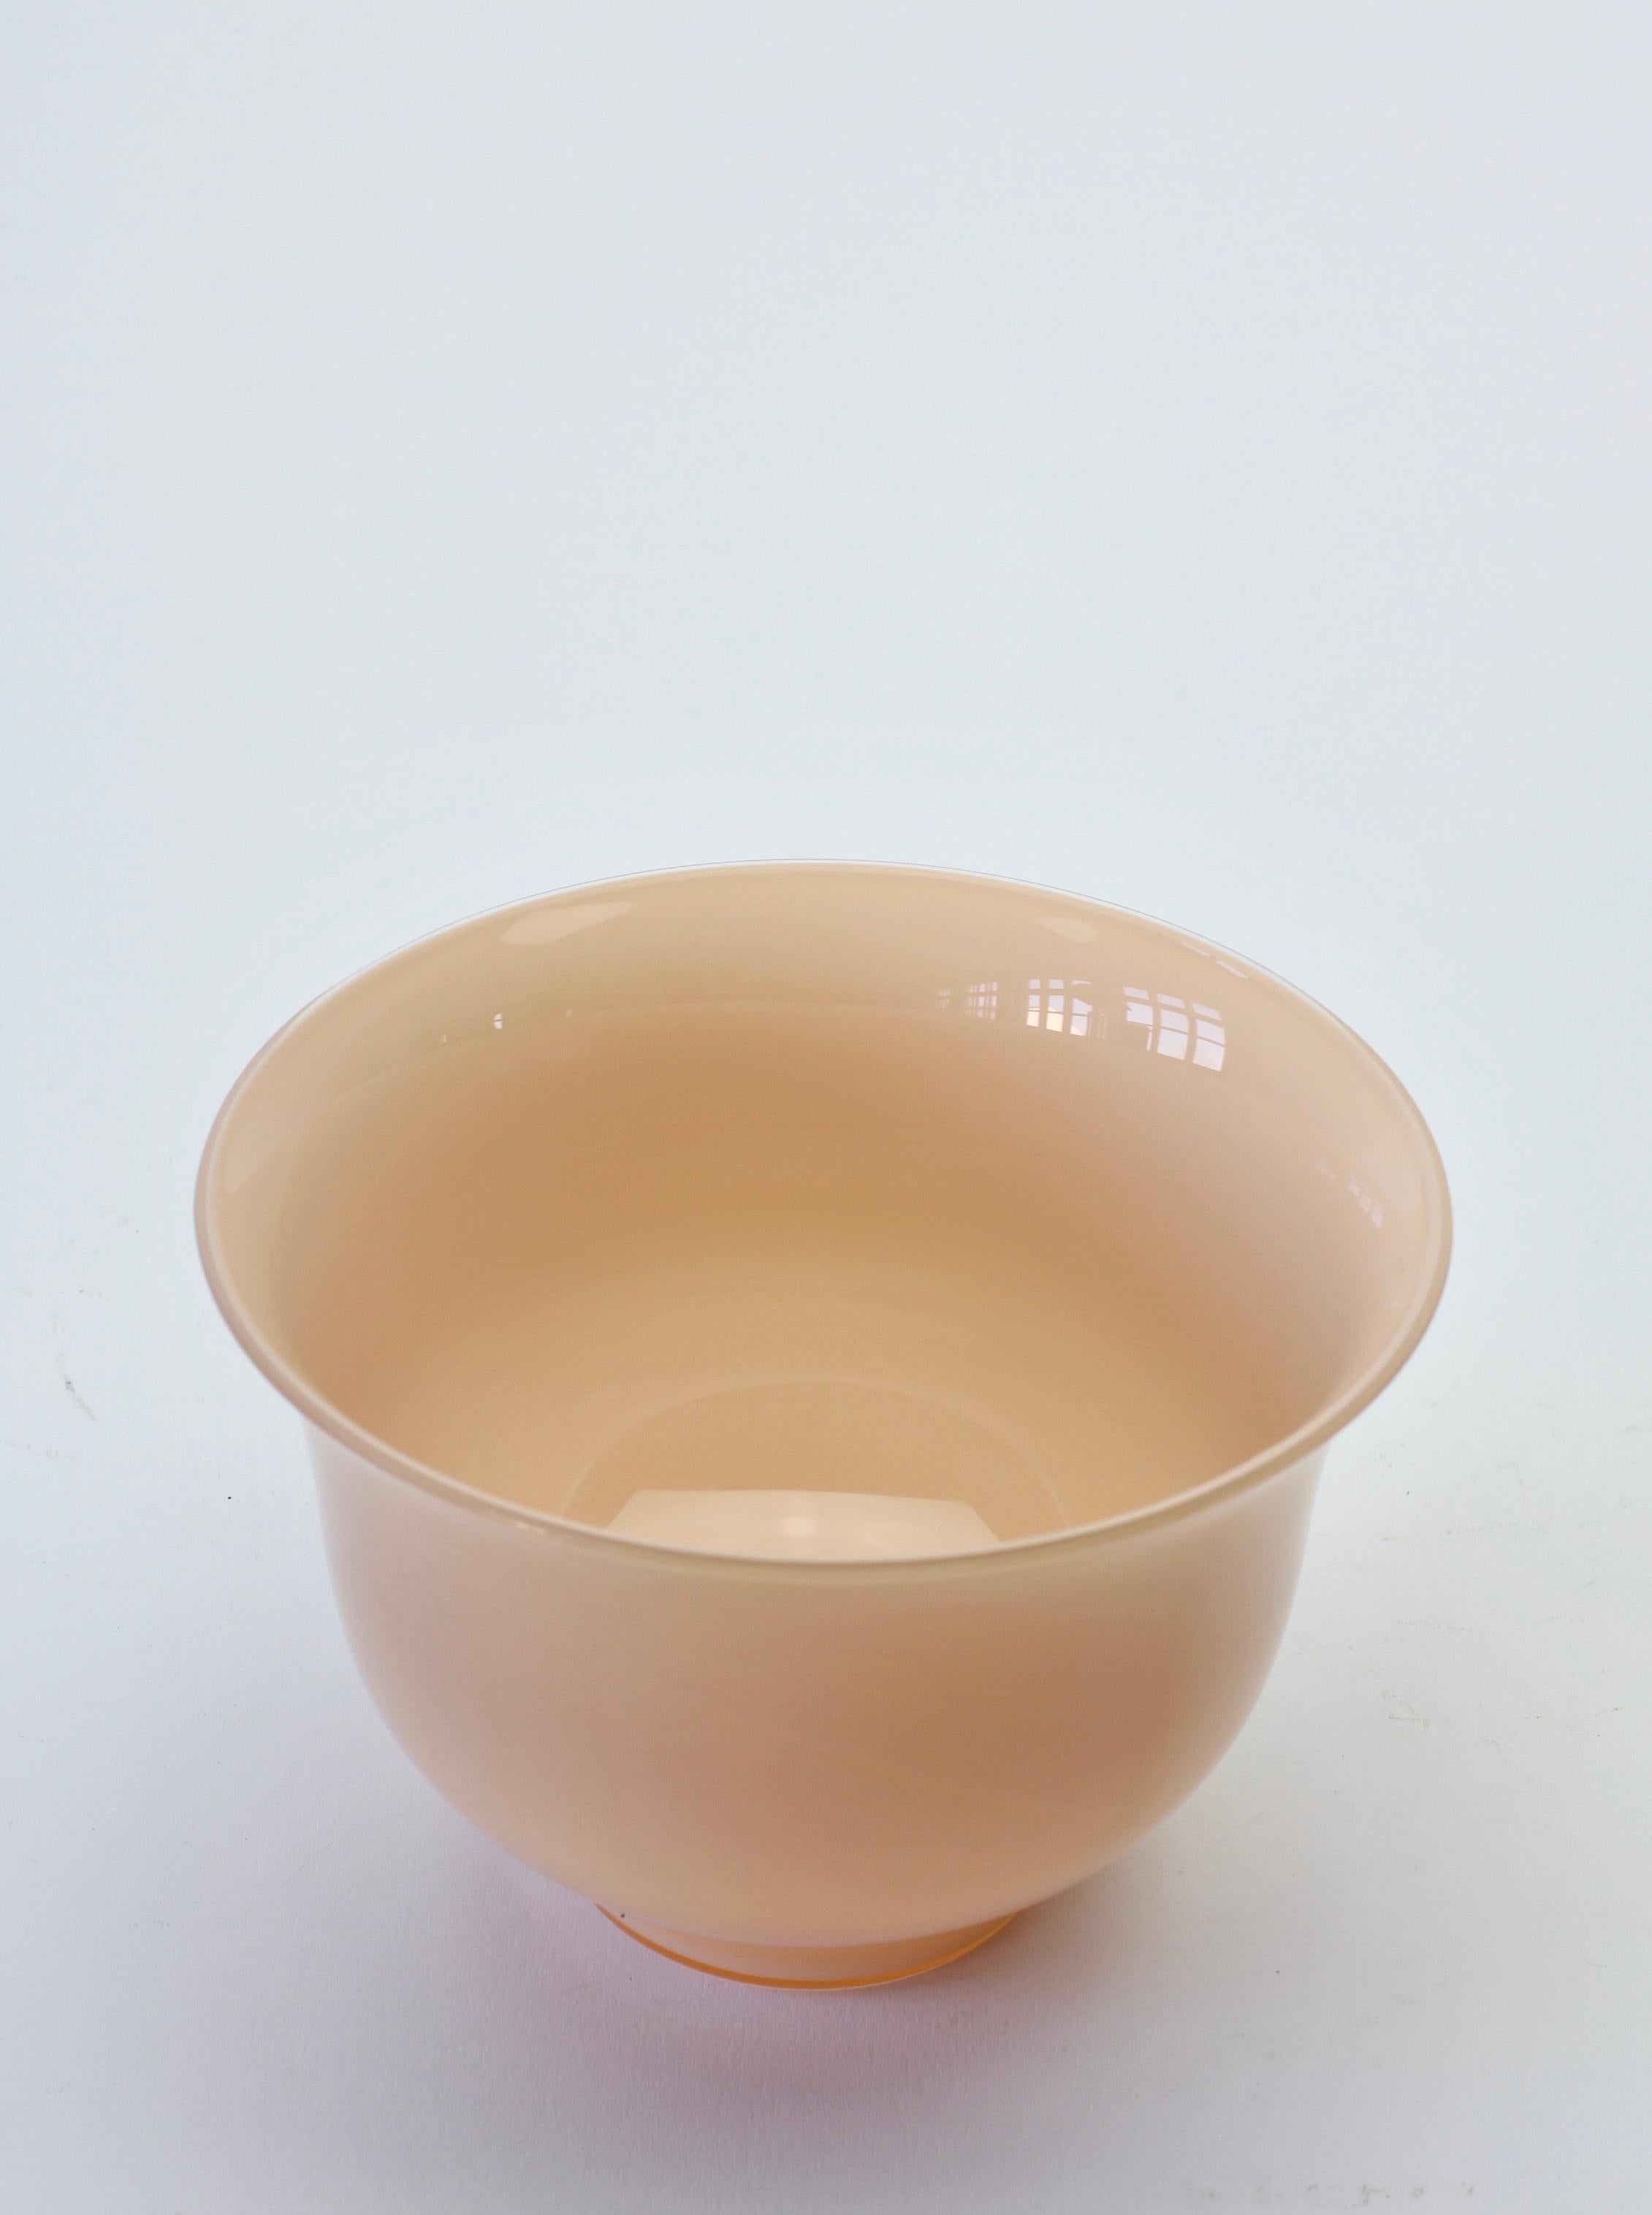 Blown Glass Cenedese Vintage Midcentury Italian Nude Pink Murano Glass Bowl, Vase or Dish For Sale